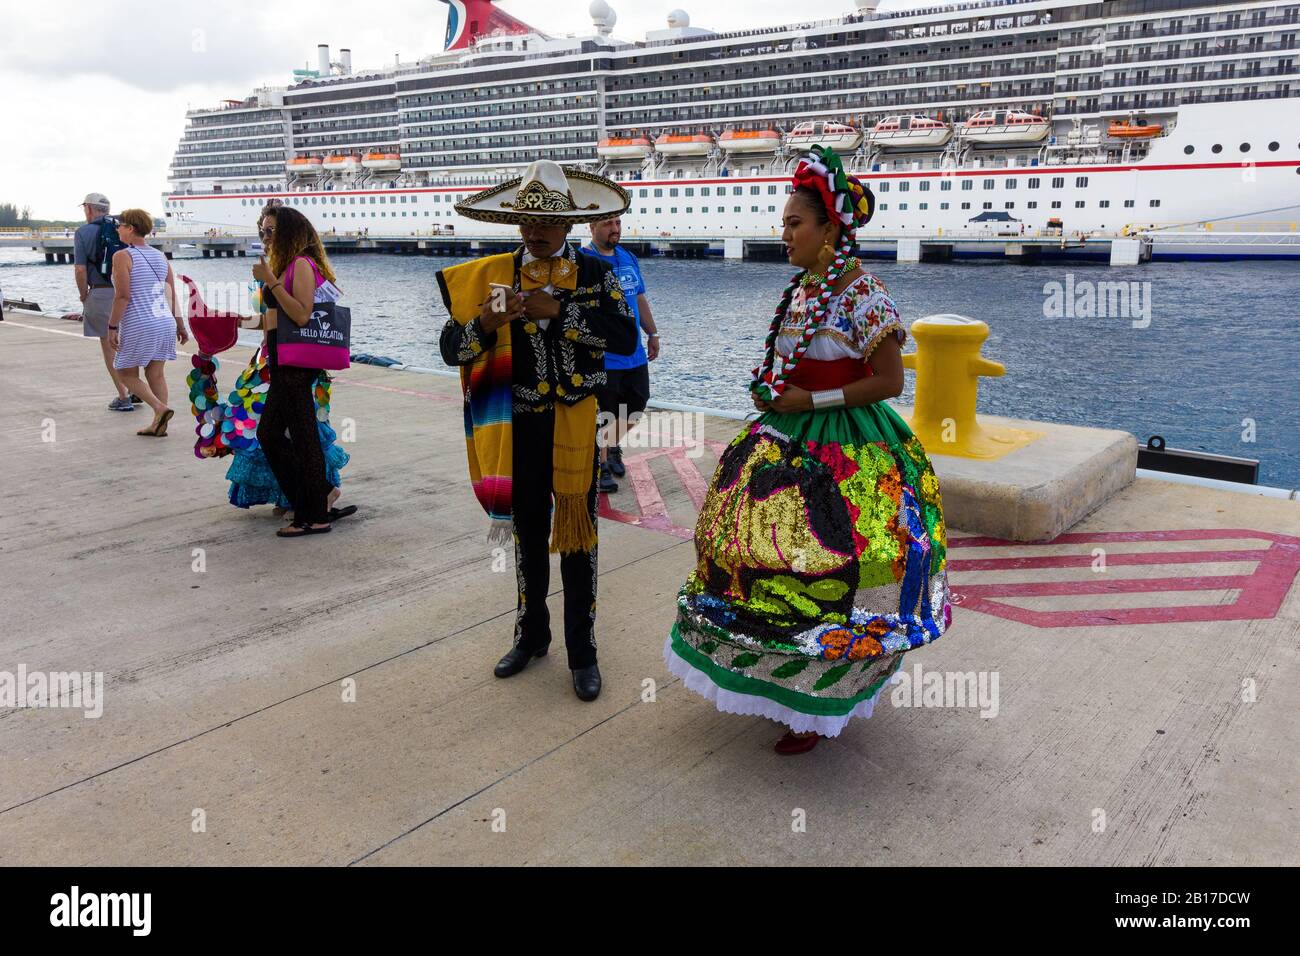 Carnival Cruise Line Ship and Actors on the dock in Cozumel Mexico Stock Photo